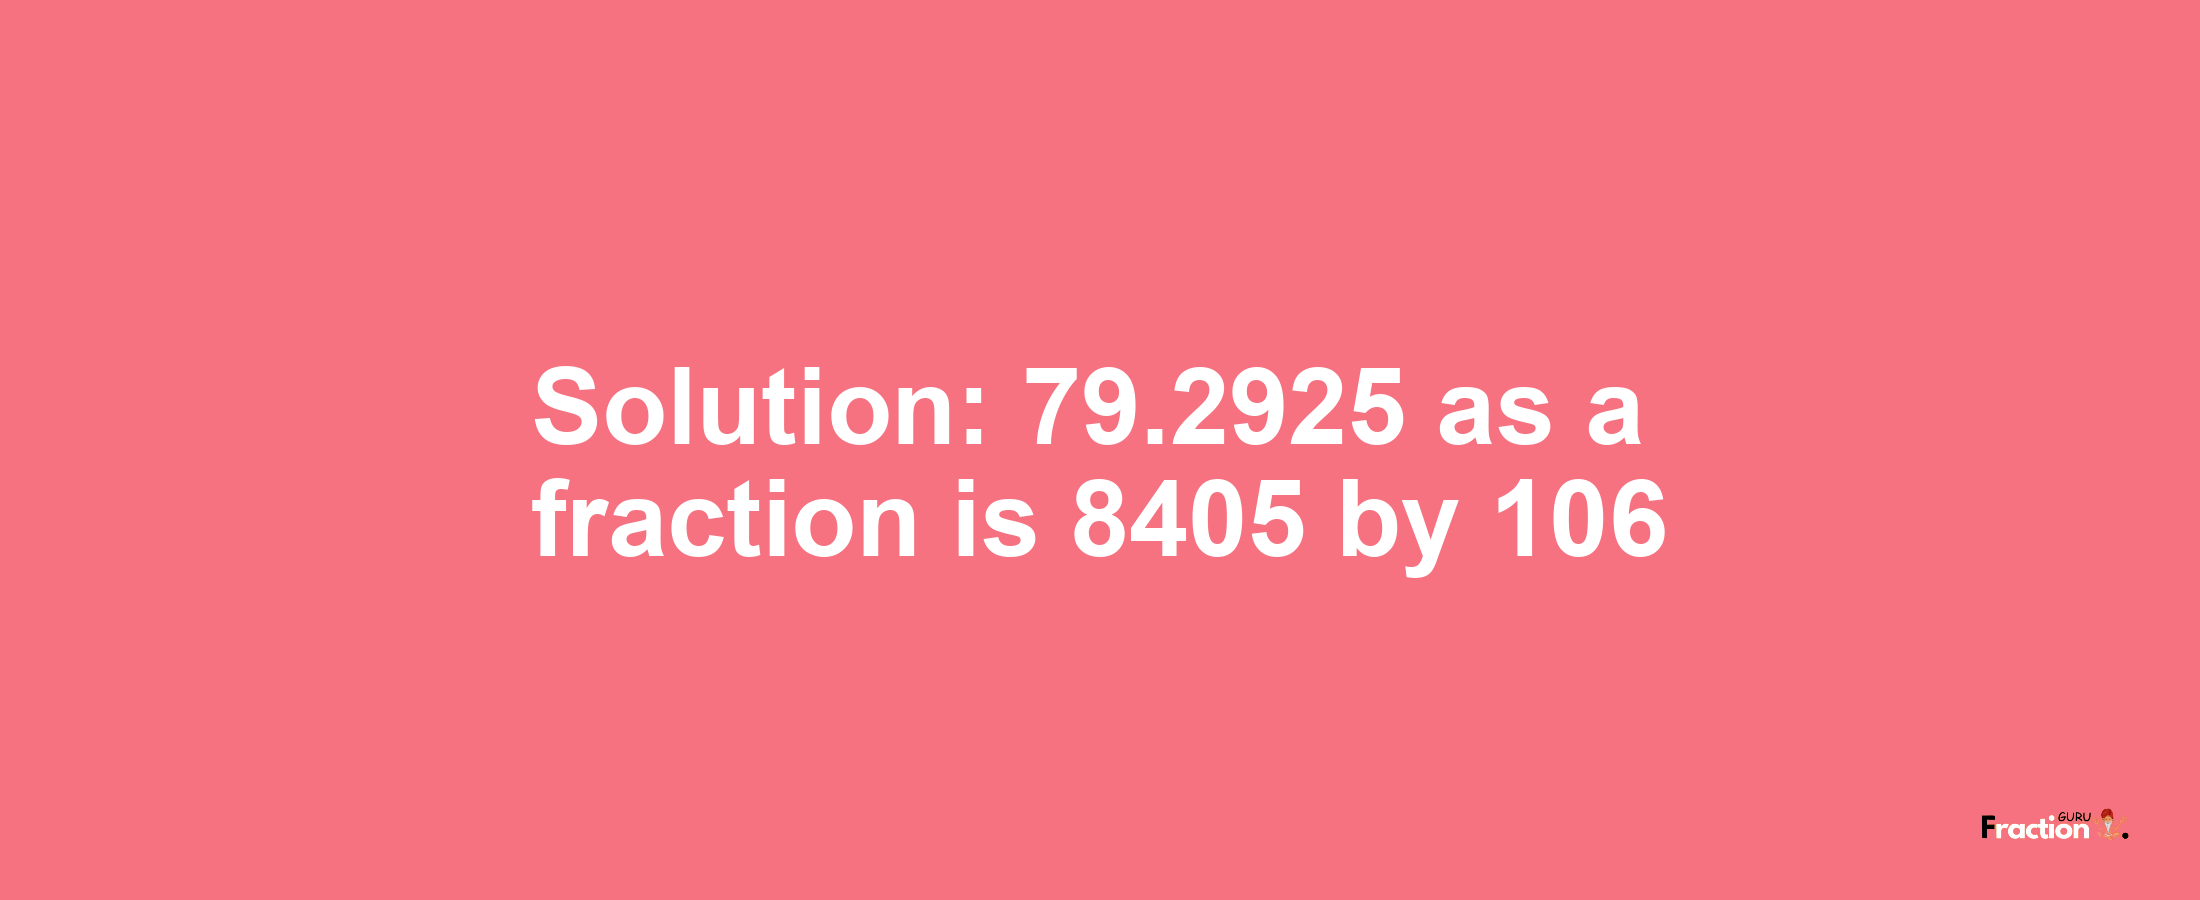 Solution:79.2925 as a fraction is 8405/106